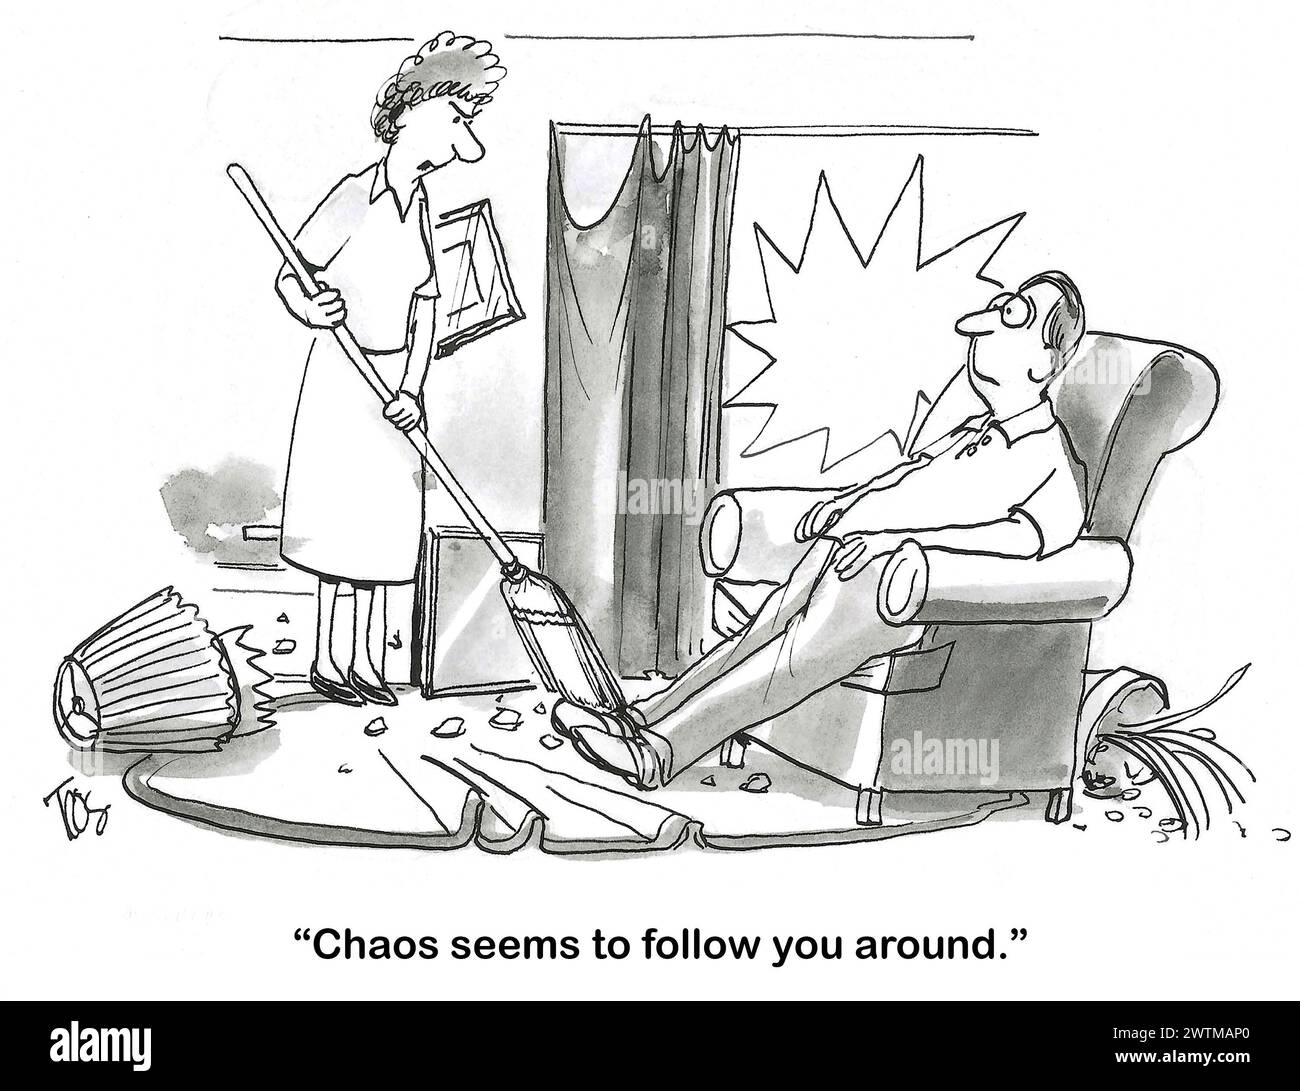 BW cartoon of a chaotic home scene.  The wife is sweeping up debris around the husband, chaos follows him around. Stock Photo